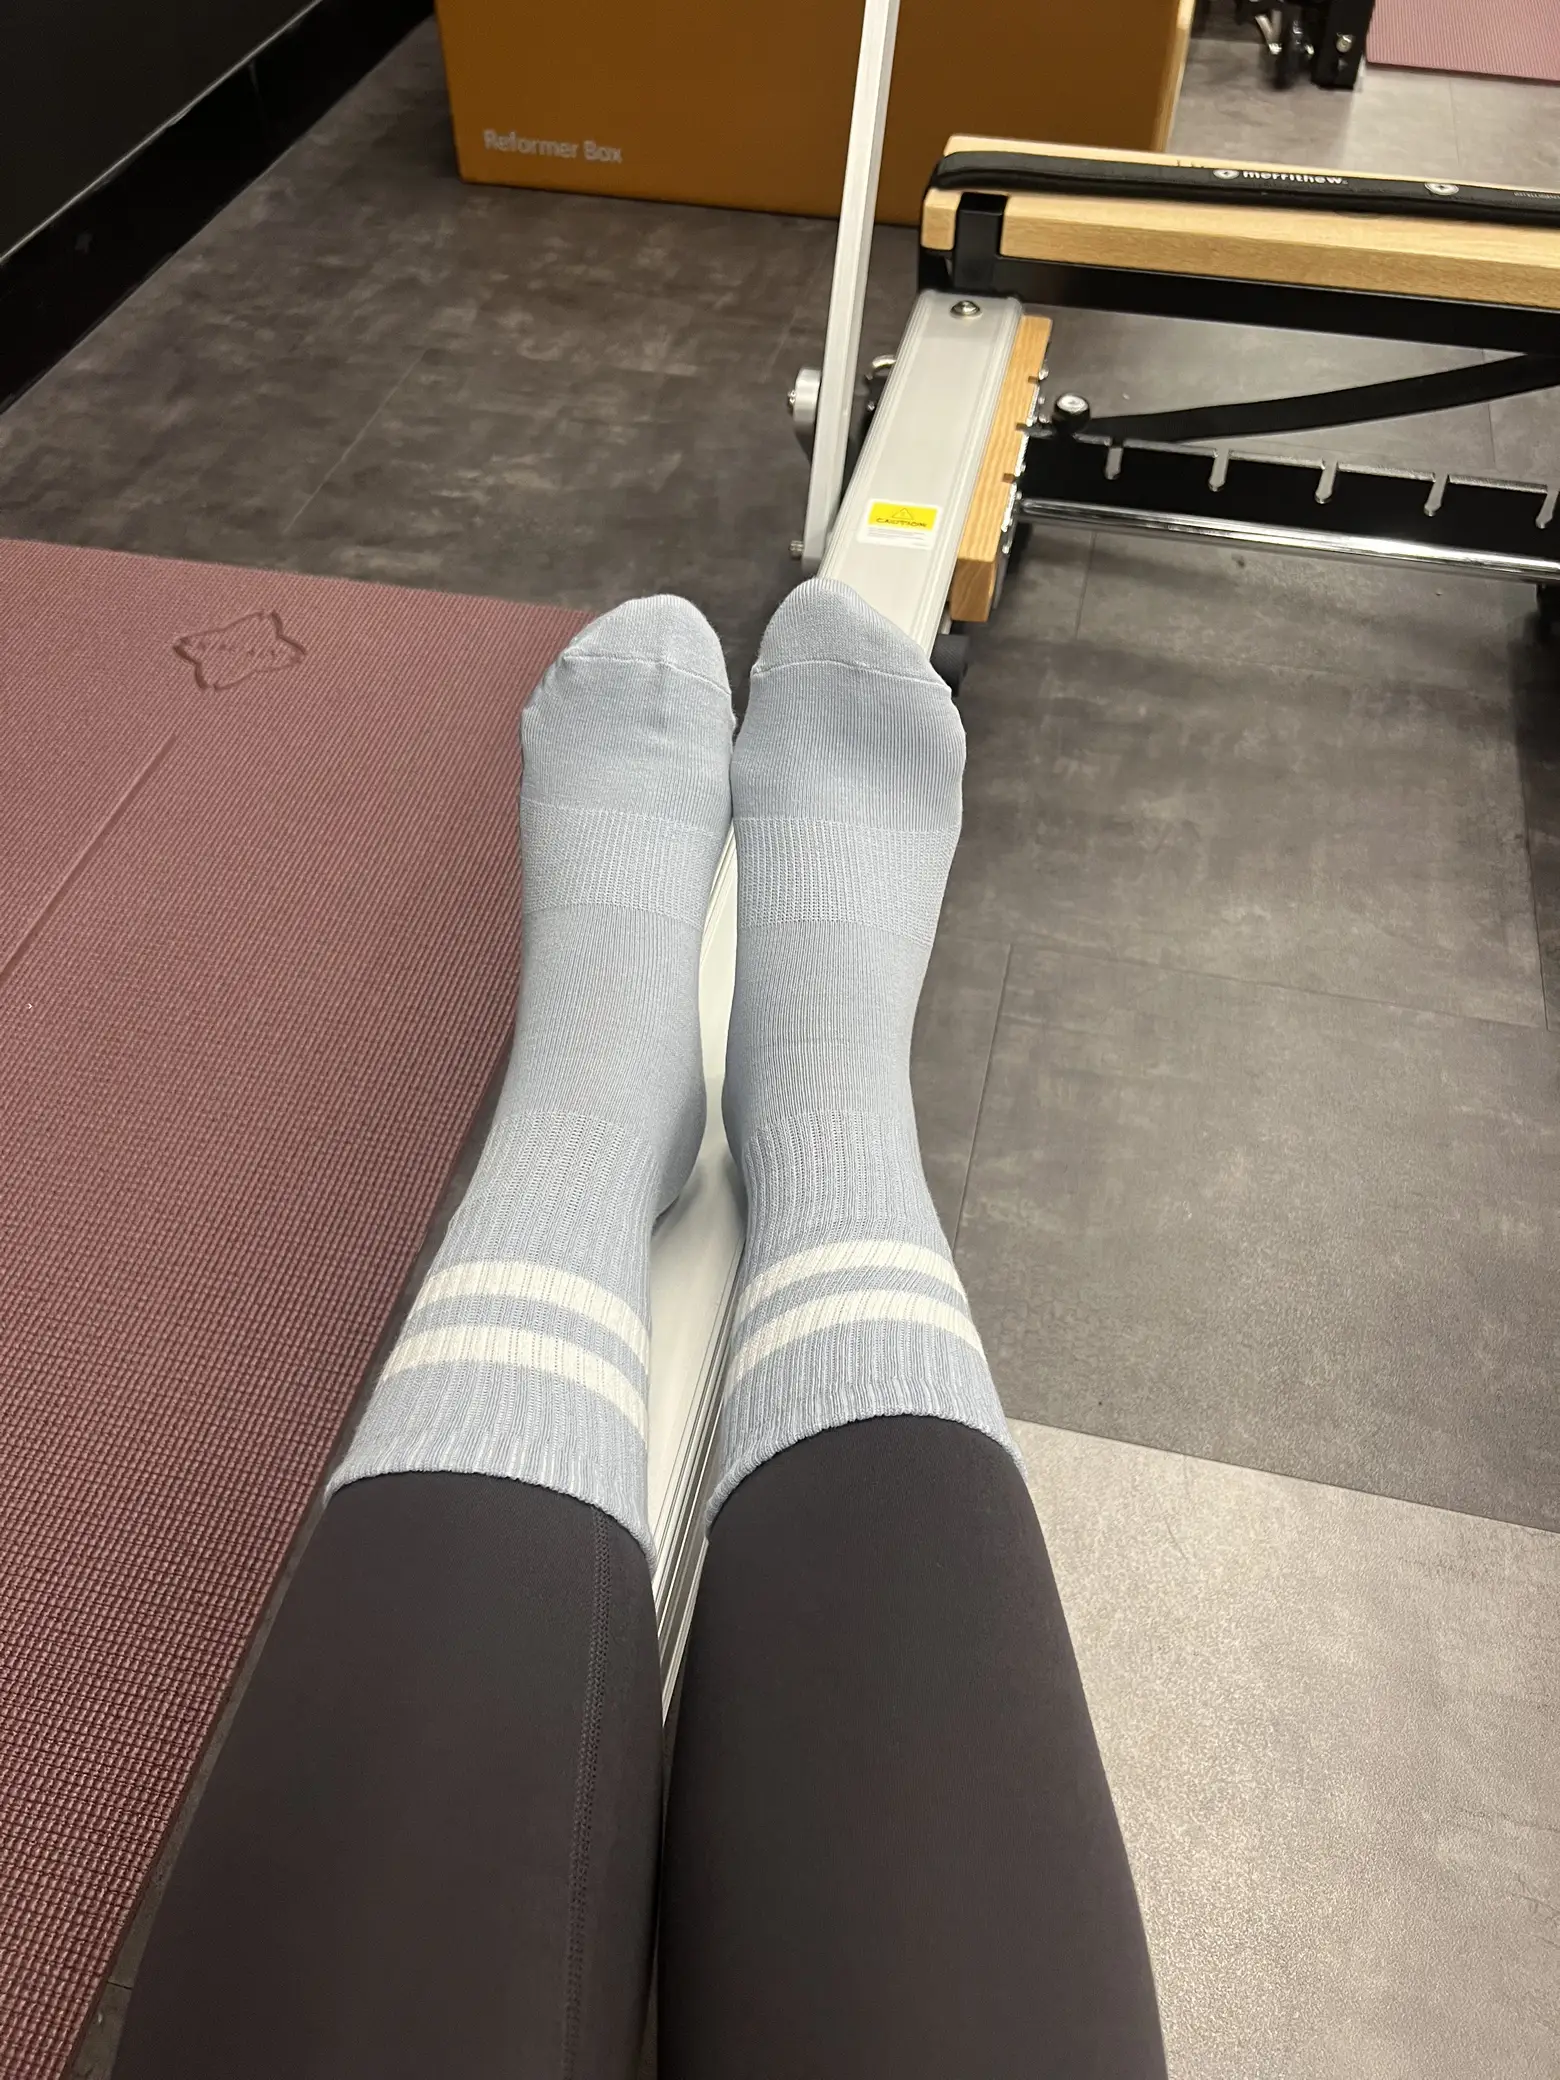 pilates princesses - where to get grip socks, Gallery posted by ✿ drew ✿